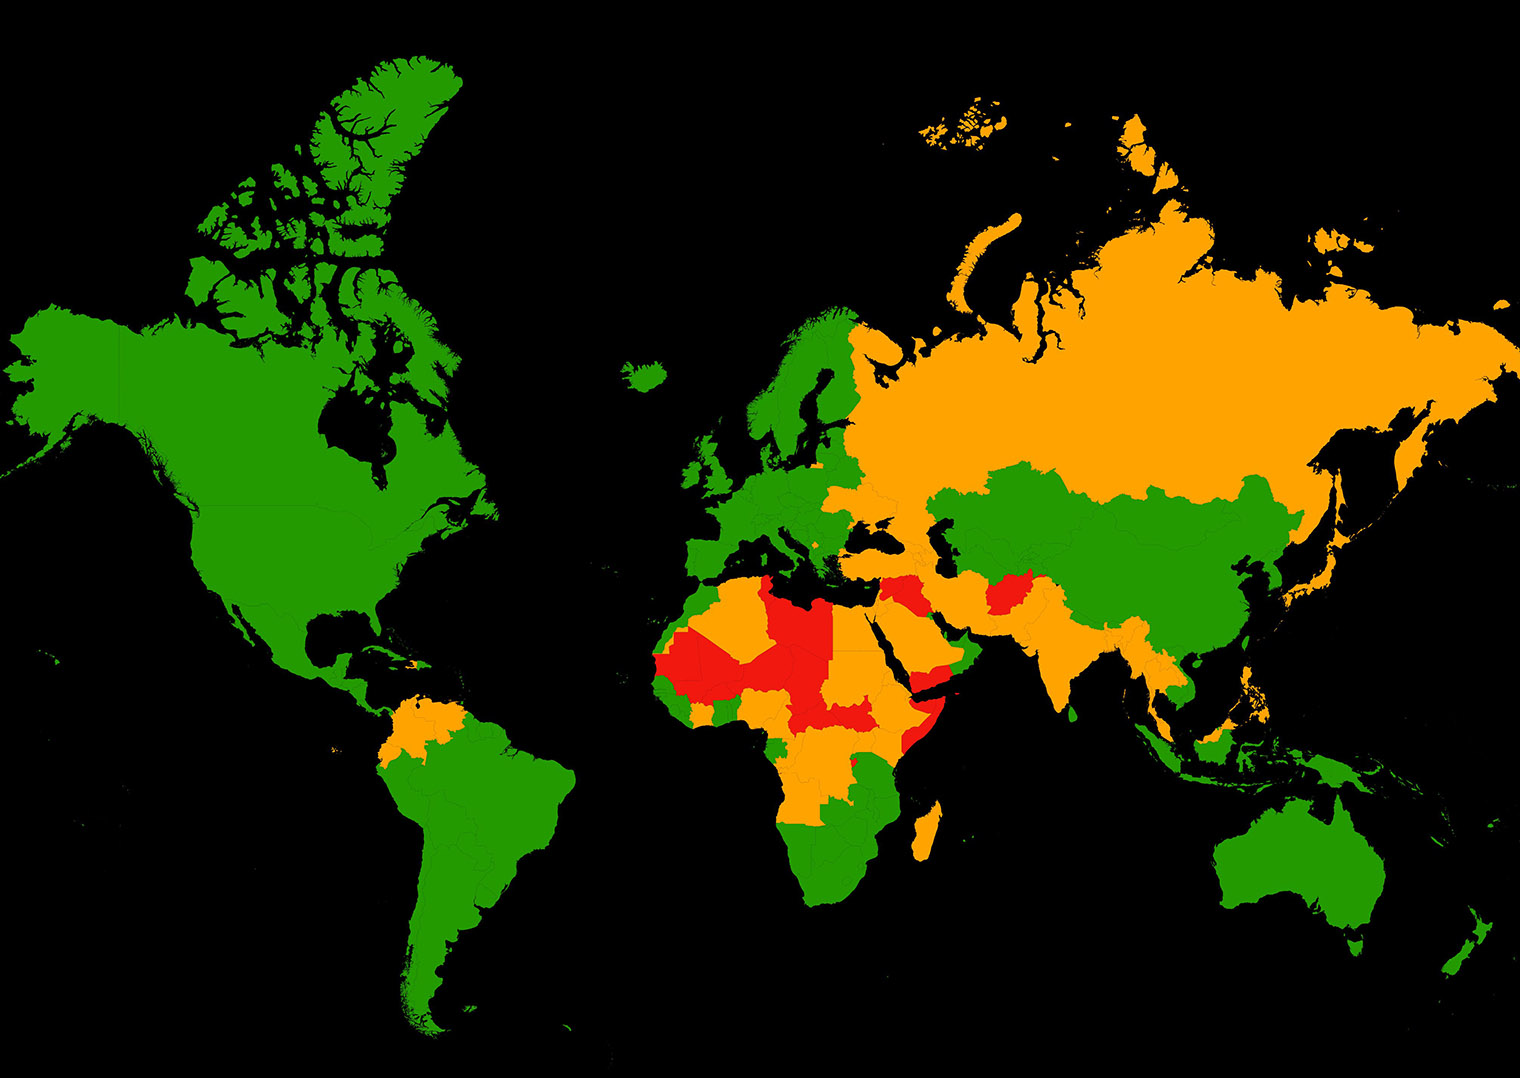 Global map of most dangerous countries